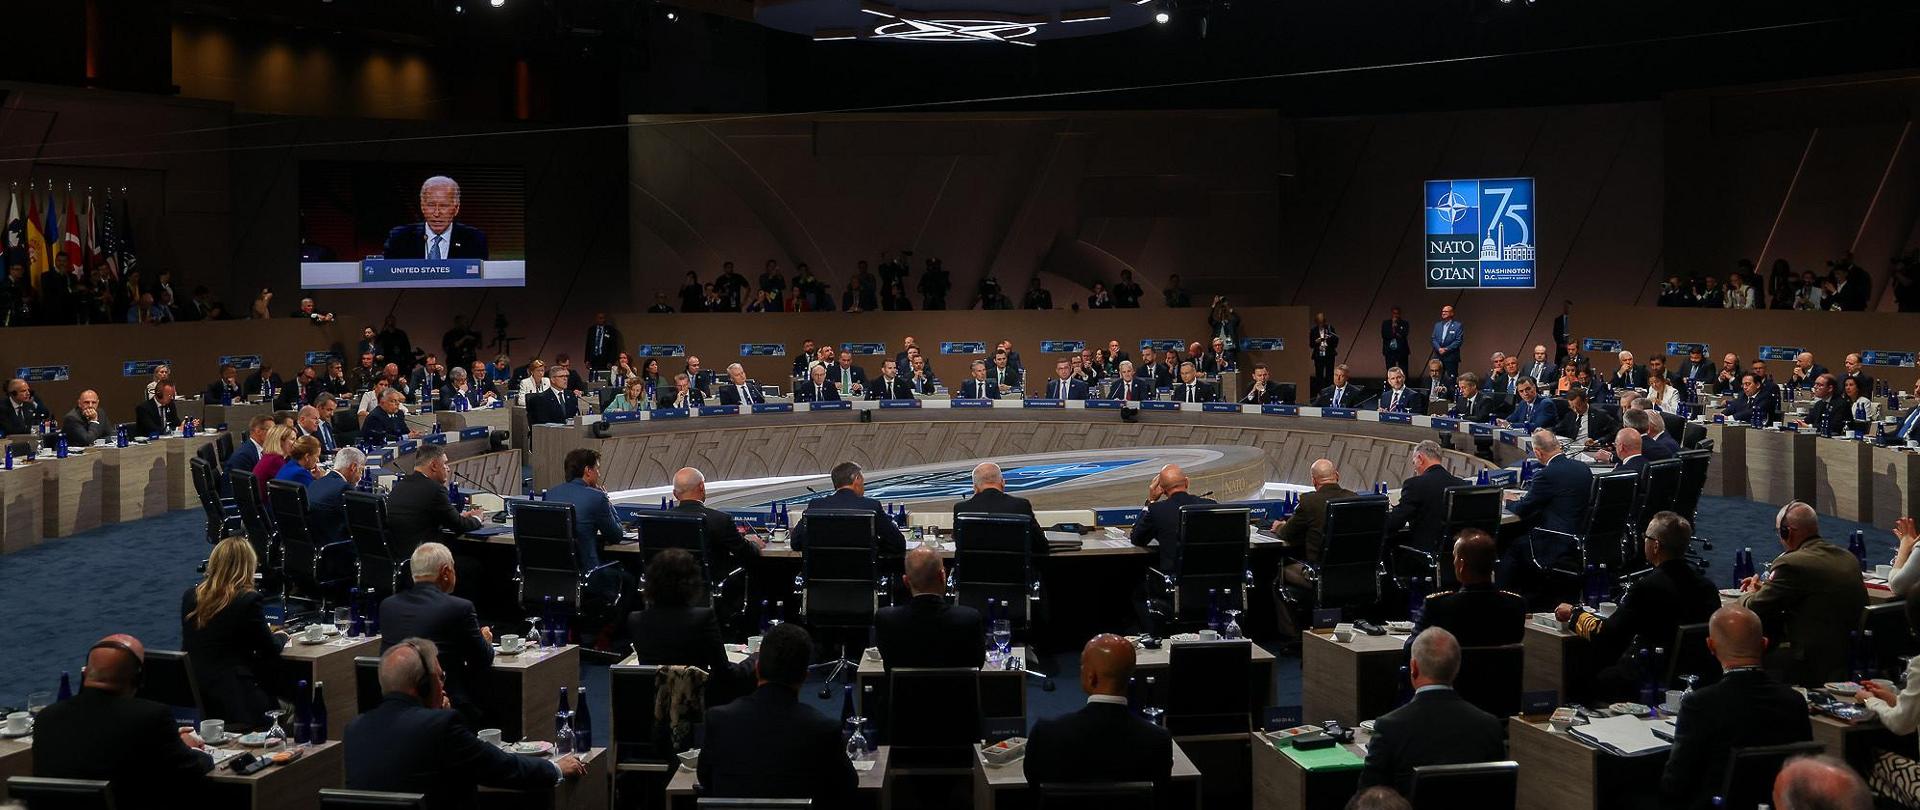 Declaration of the NATO Summit in Washington adopted